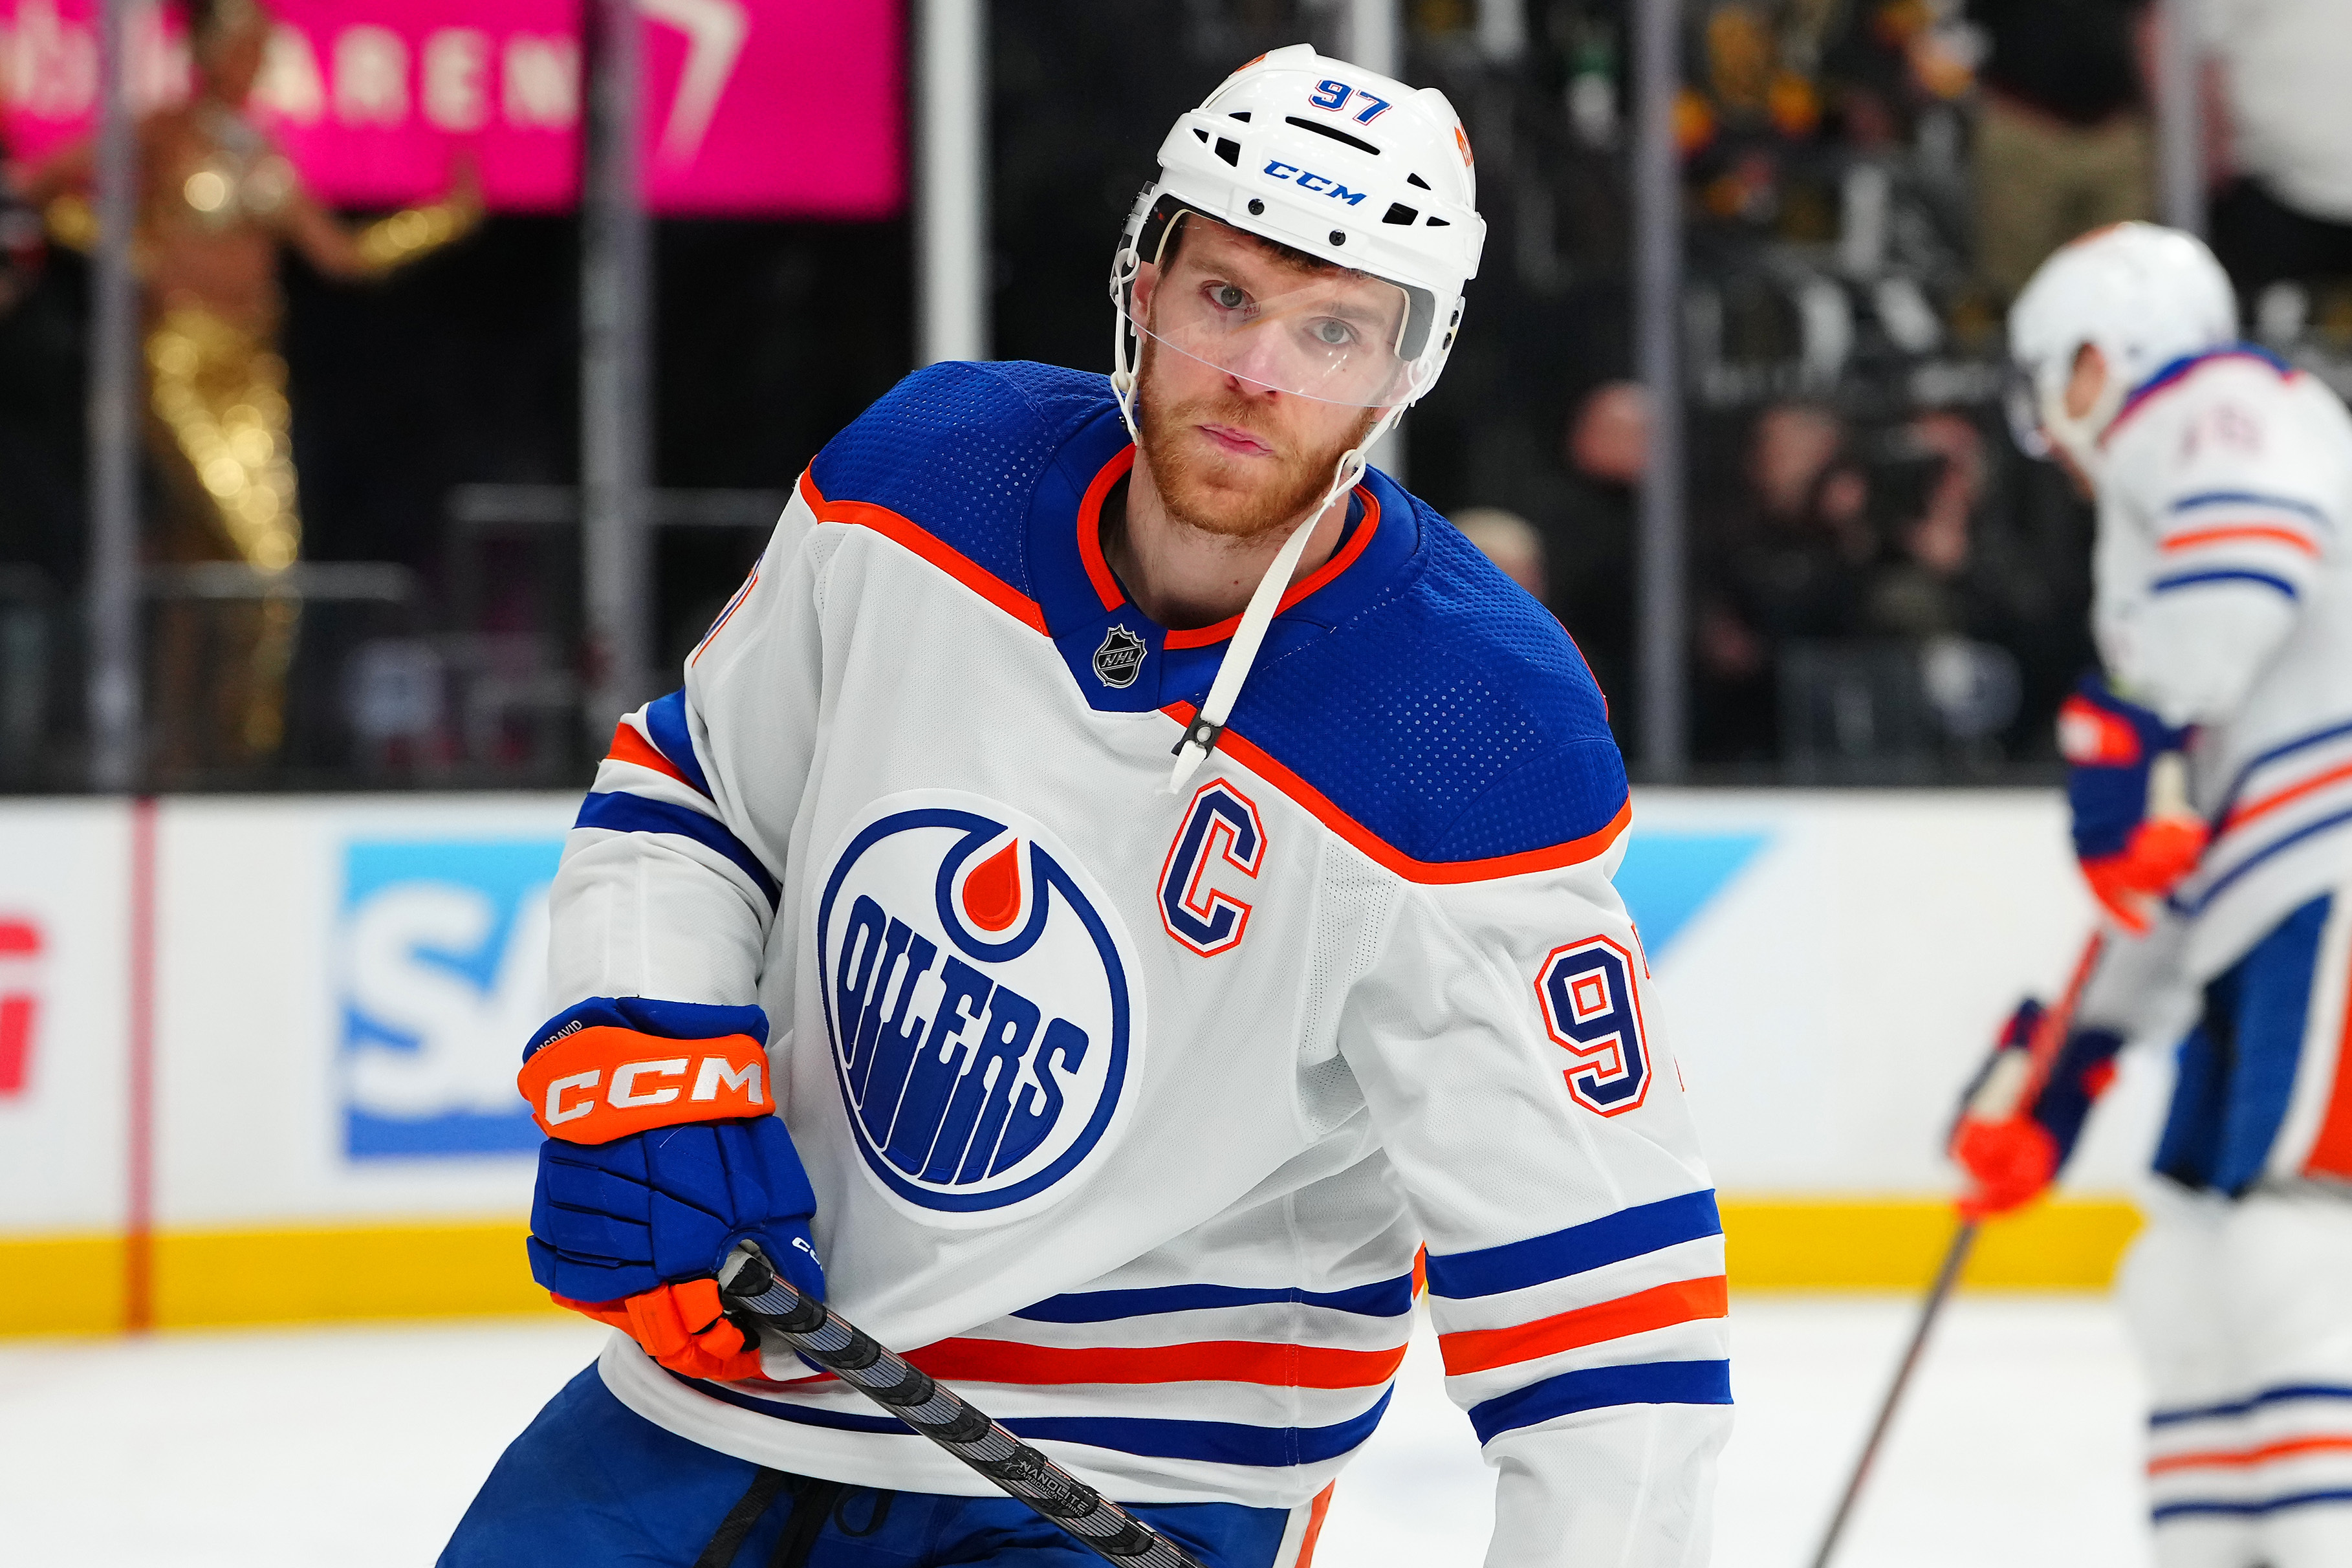 Draisaitl scores twice, leads Oilers past Golden Knights for 3rd